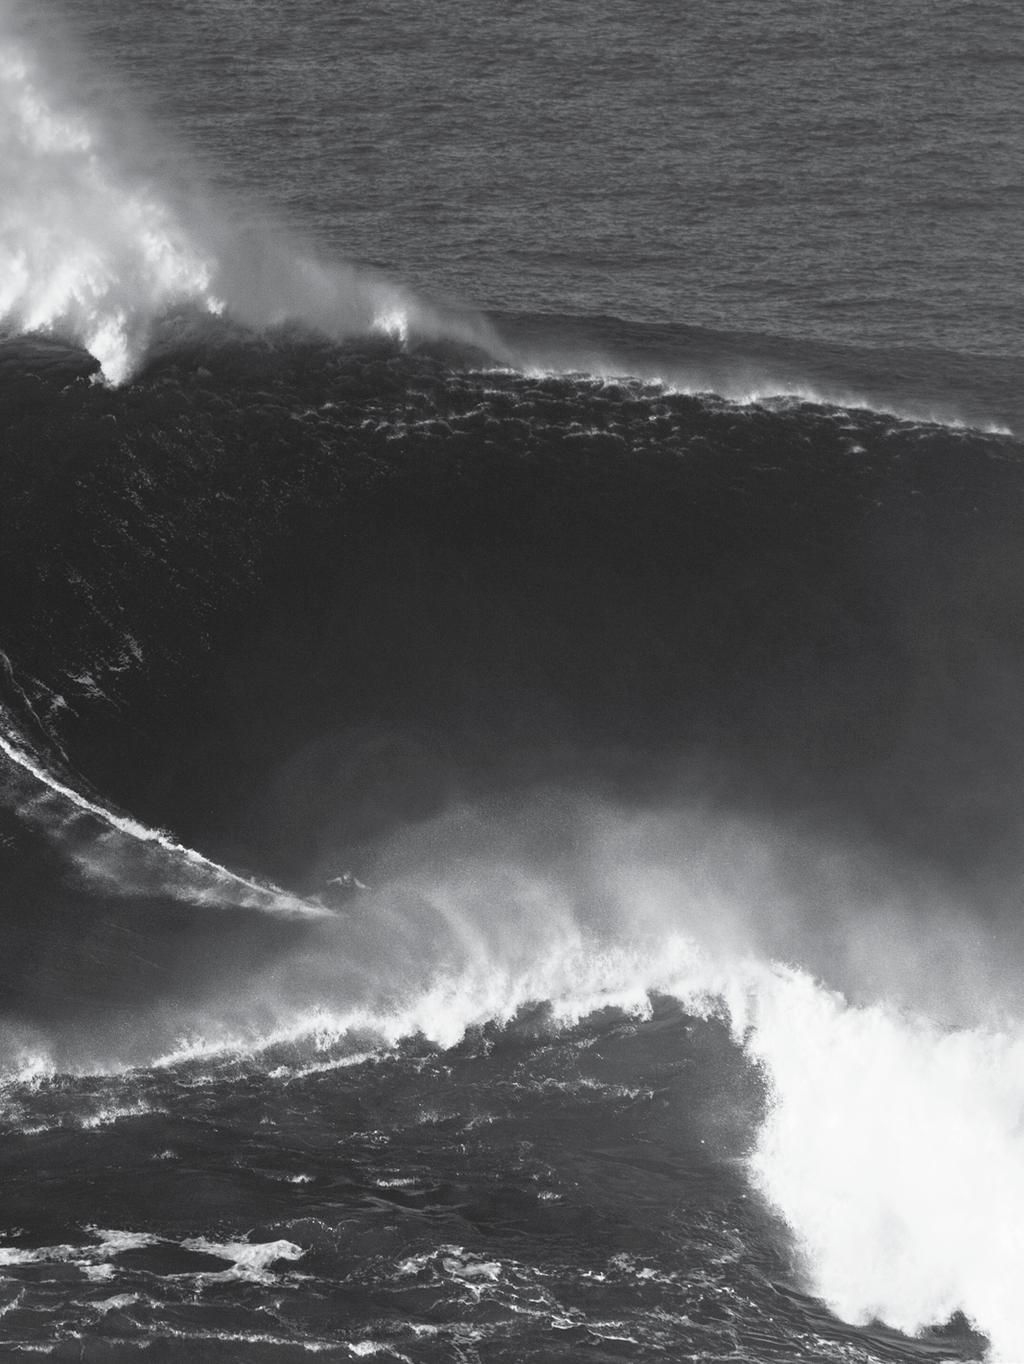 POLICY BRIEF ON NATURE S SHOULDERS RIDING THE BIG WAVES IN NAZARÉ Maria A.